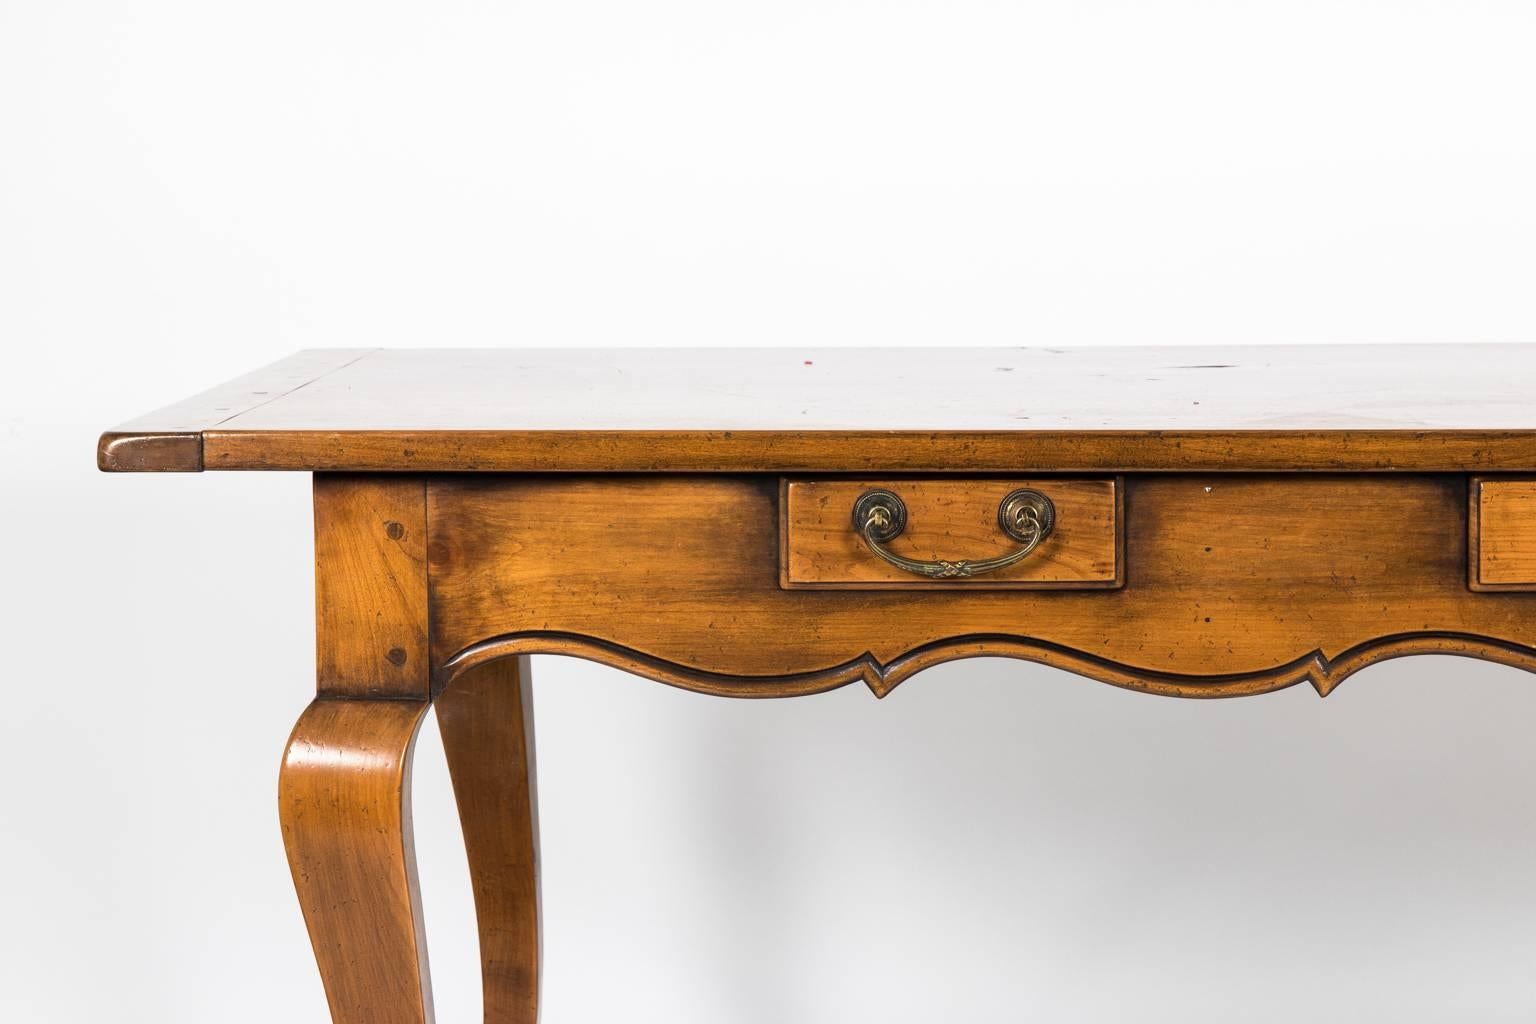 French Provincial style three-drawer walnut work table.
    